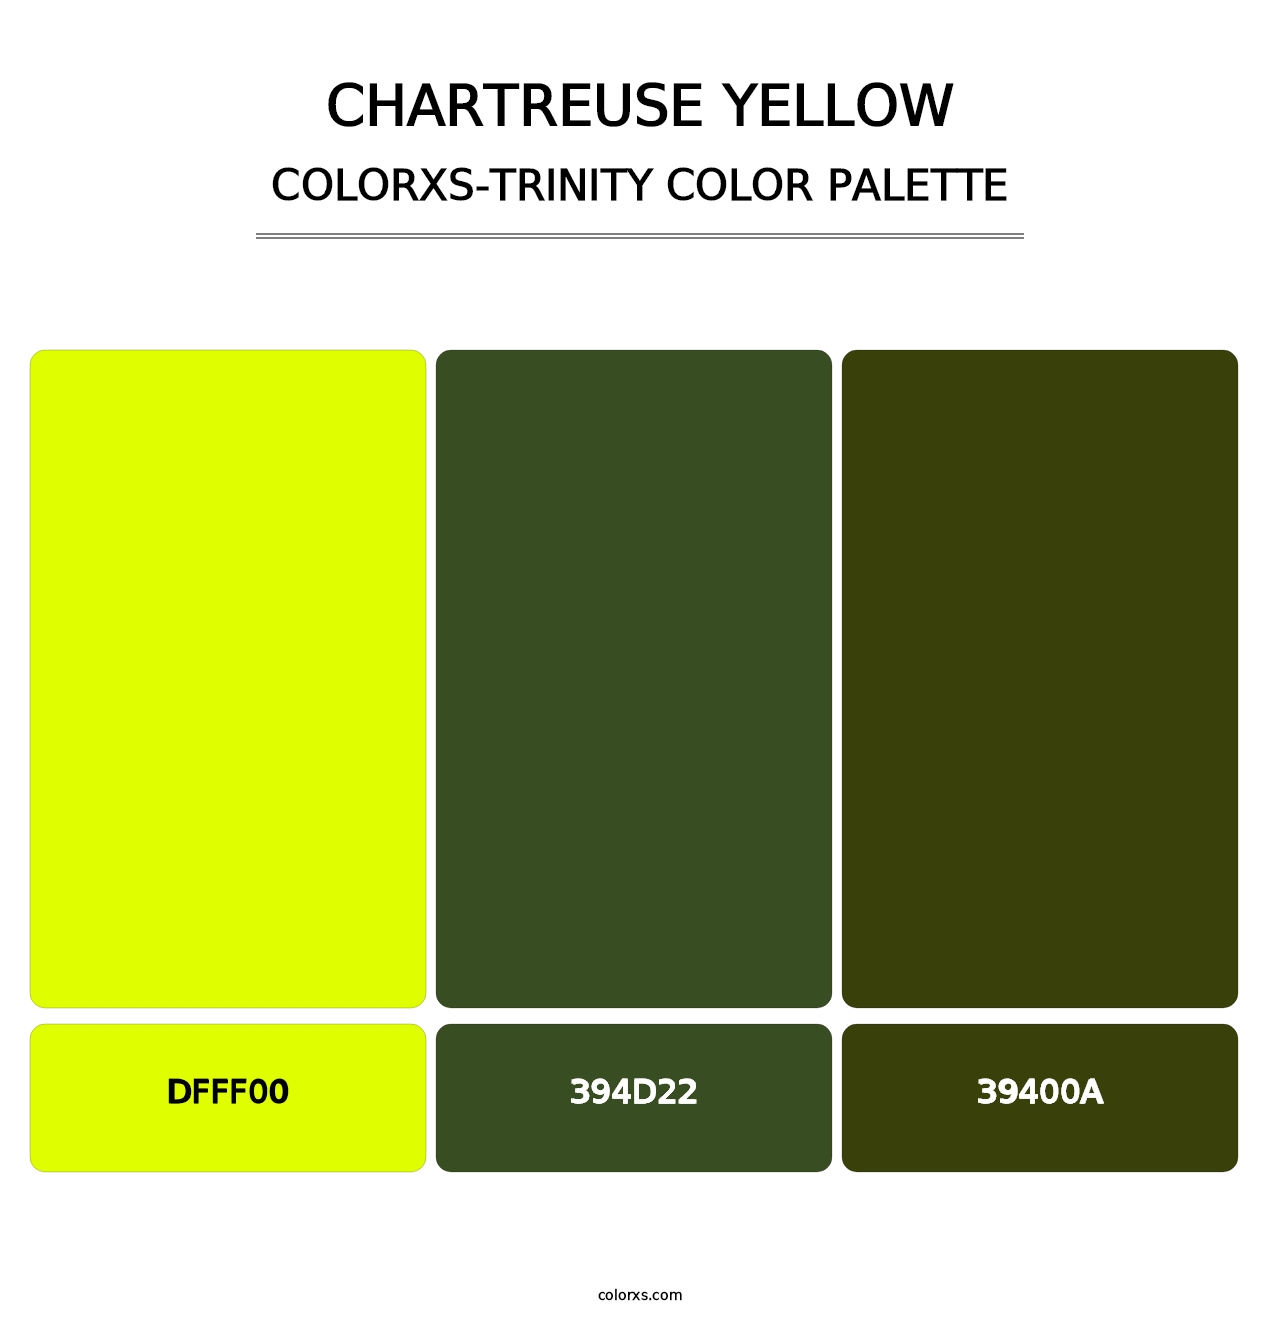 Chartreuse Yellow - Colorxs Trinity Palette